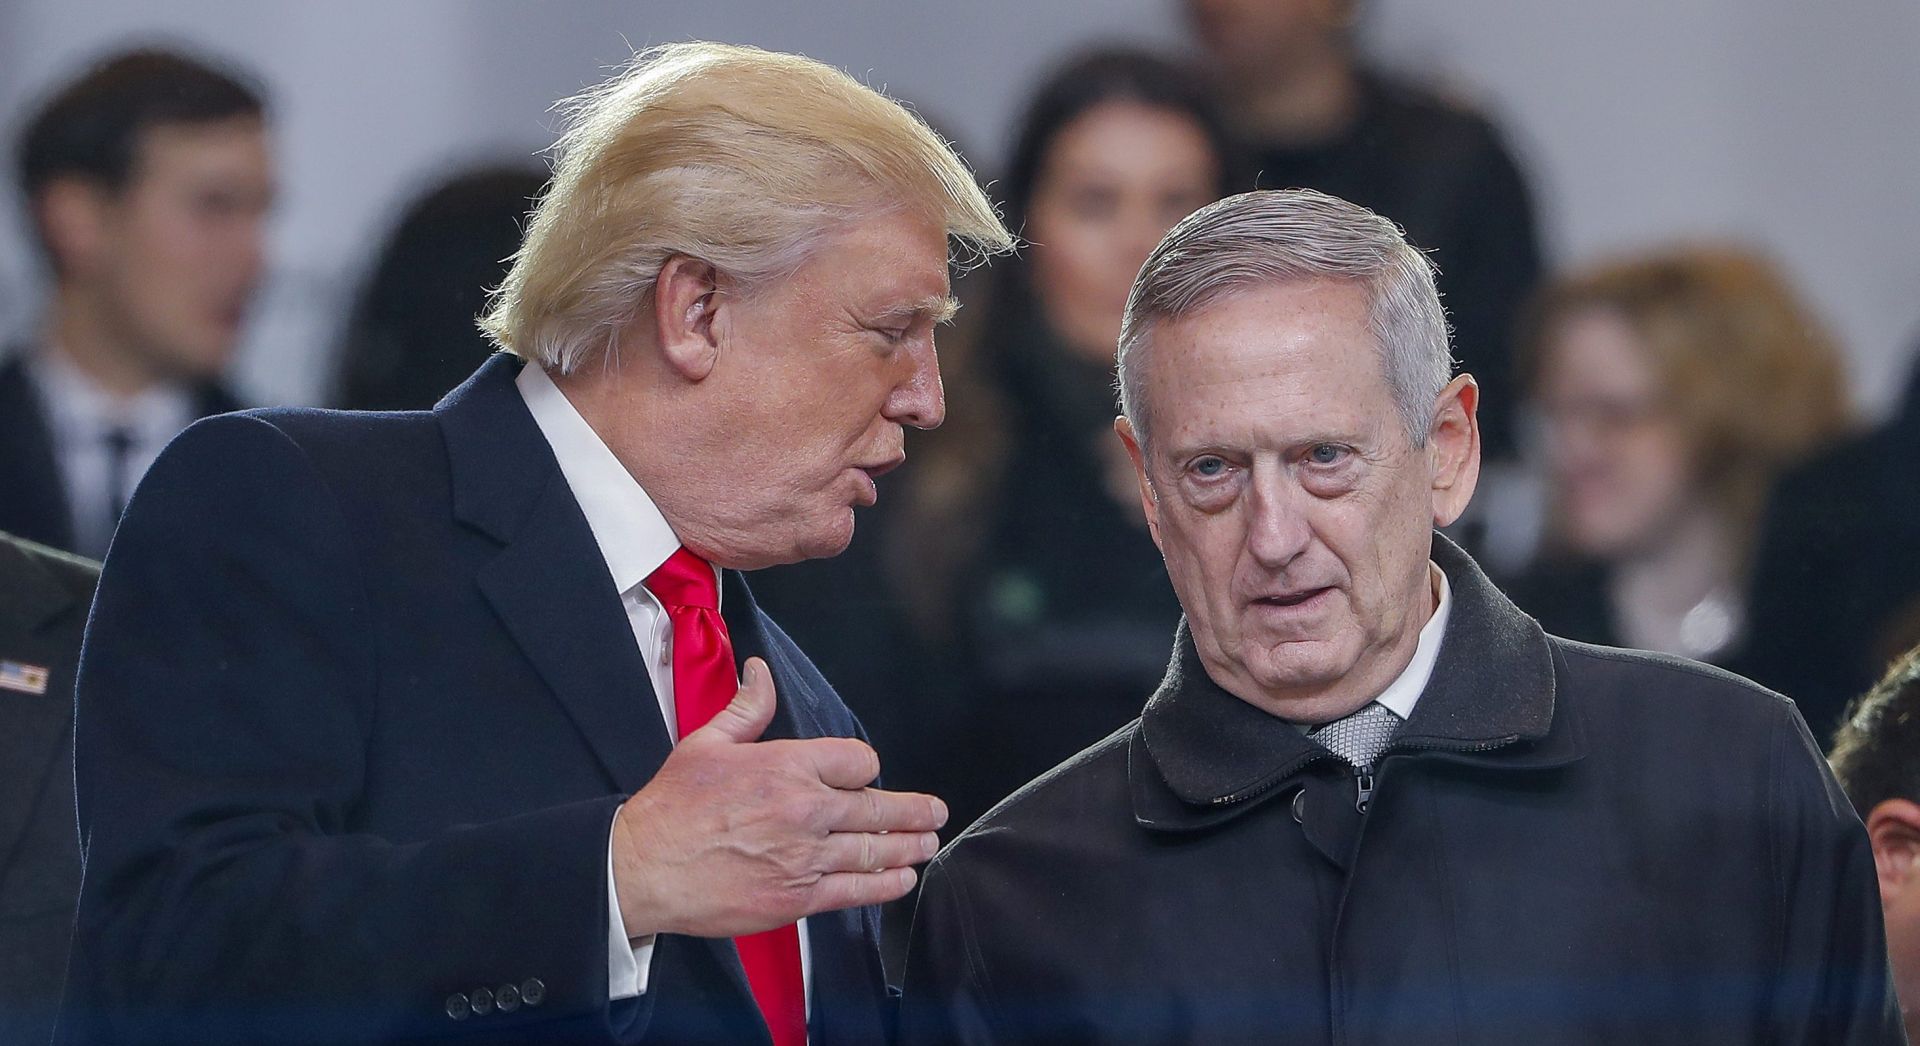 epa05736779 US President Donald J. Trump (L) greets new Secretary of Defense James 'Mad Dog' Mattis (R) in the reviewing stand during the Inaugural Parade after Trump took the oath of office as the 45th President of the United States in Washington, DC, USA, 20 January 2017. Trump won the 08 November 2016 election to become the next US President.  EPA/ERIK S. LESSER